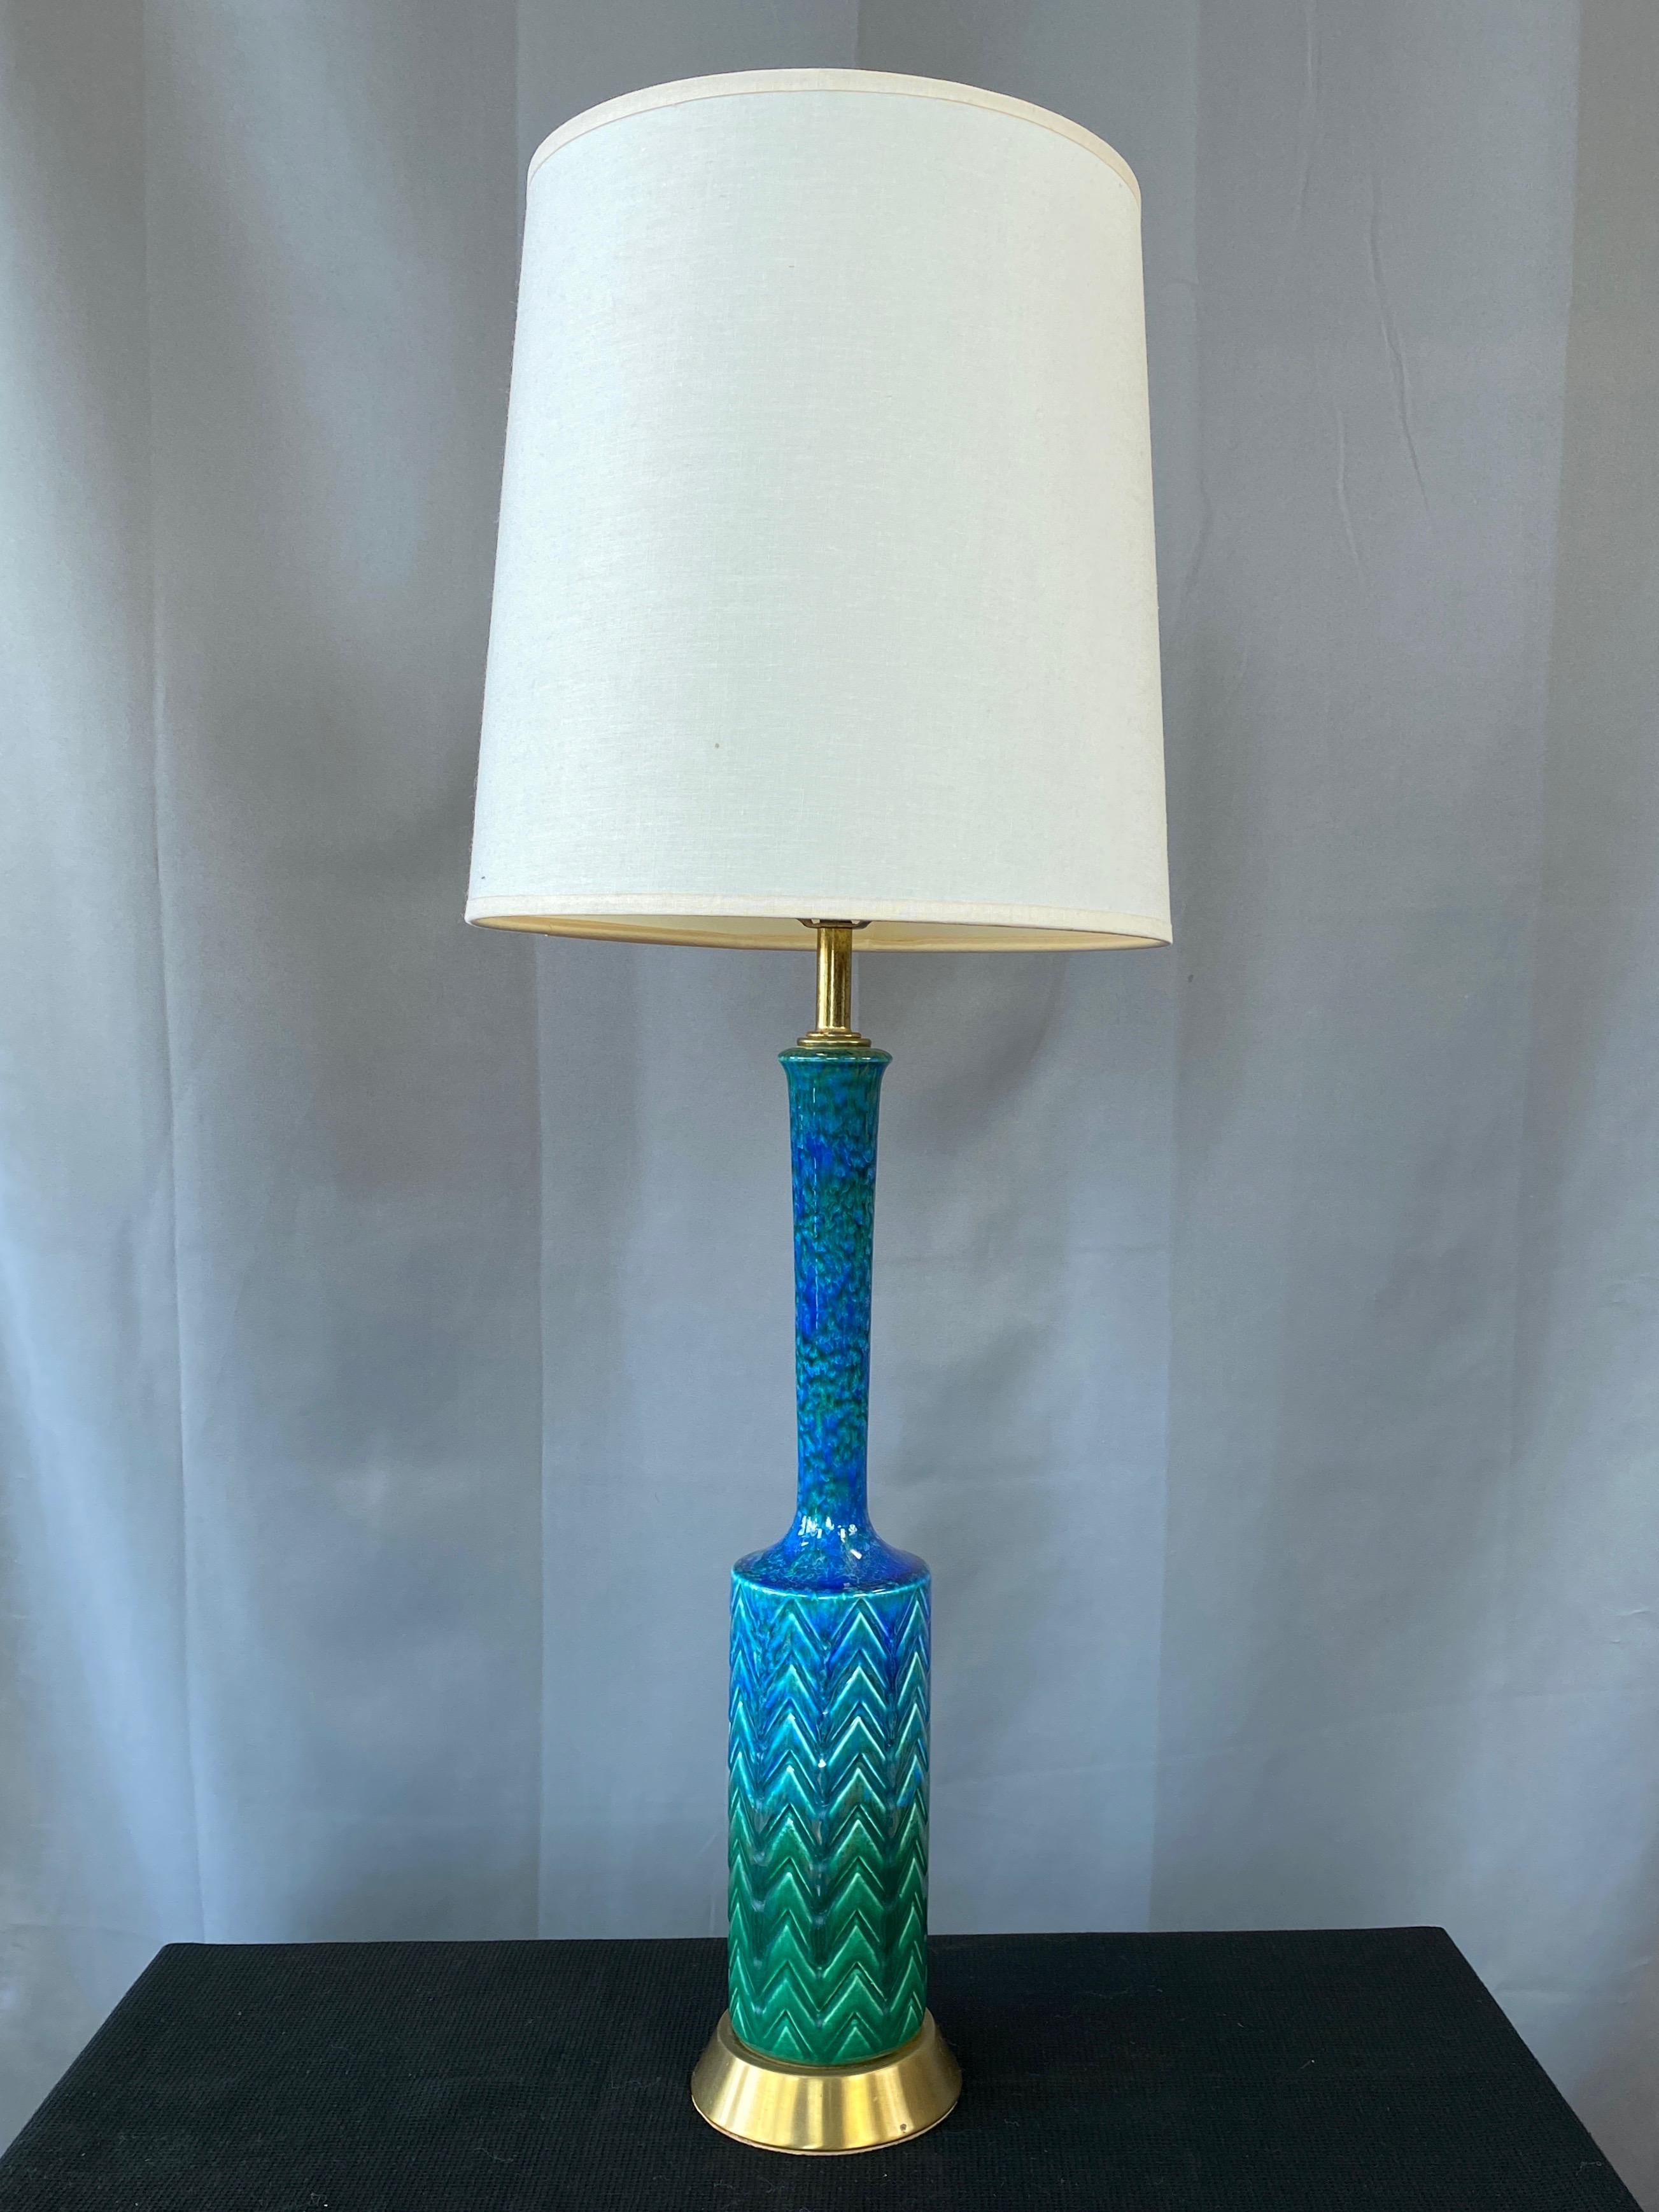 A delightfully proportioned and beautifully glazed 1960s Italian ceramic and brass table lamp in the style of Aldo Londi’s “Rimini blue” series for Bitossi.

Slender cylindrical body with stacked chevron motif in relief topped by a narrow